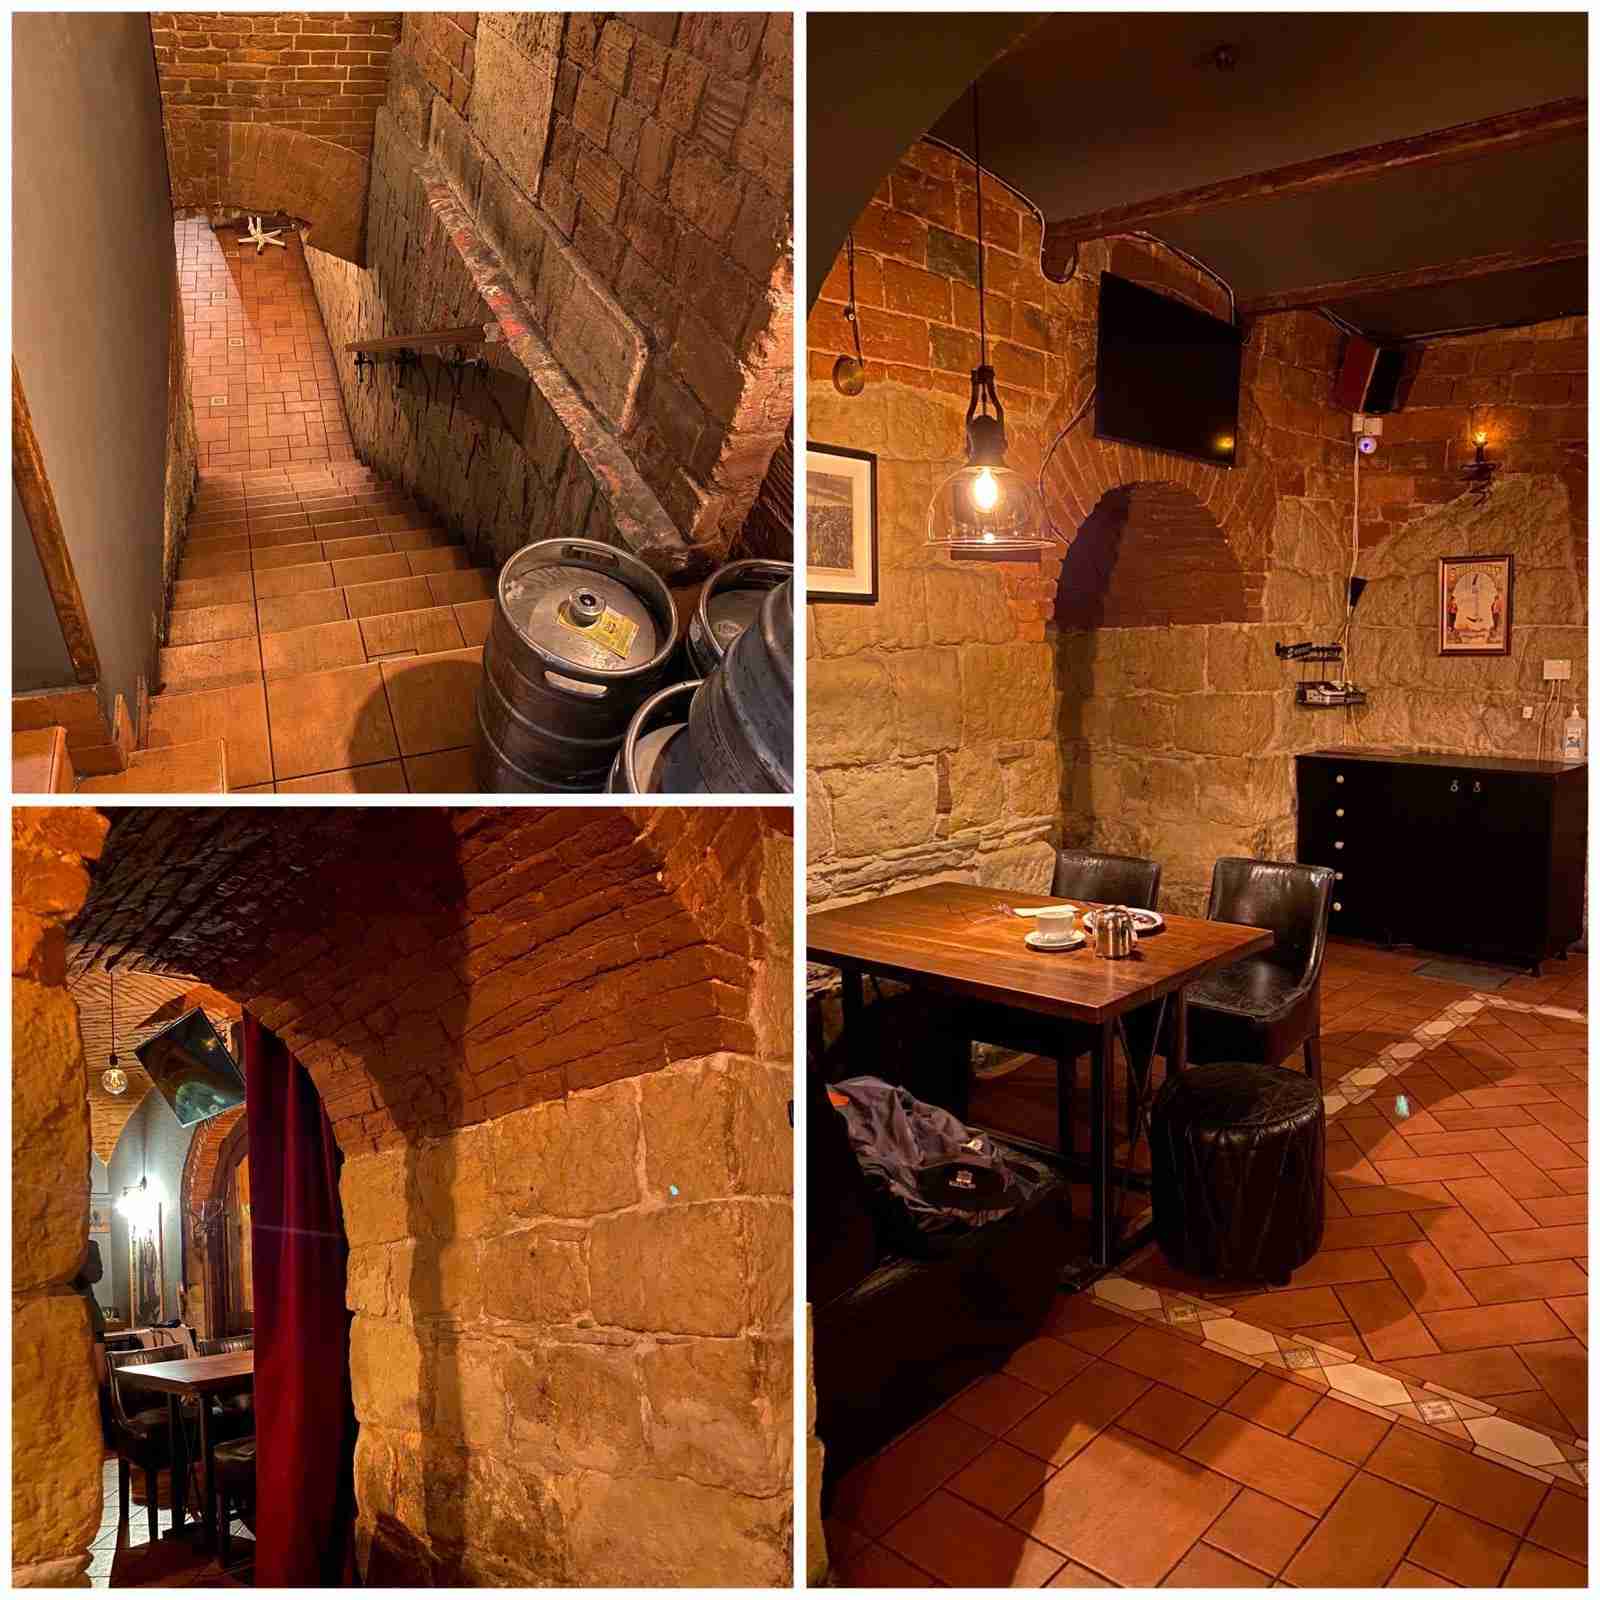 If you wish to dine uninterruptedly in Ukraine, then choose a restaurant with a cellar.